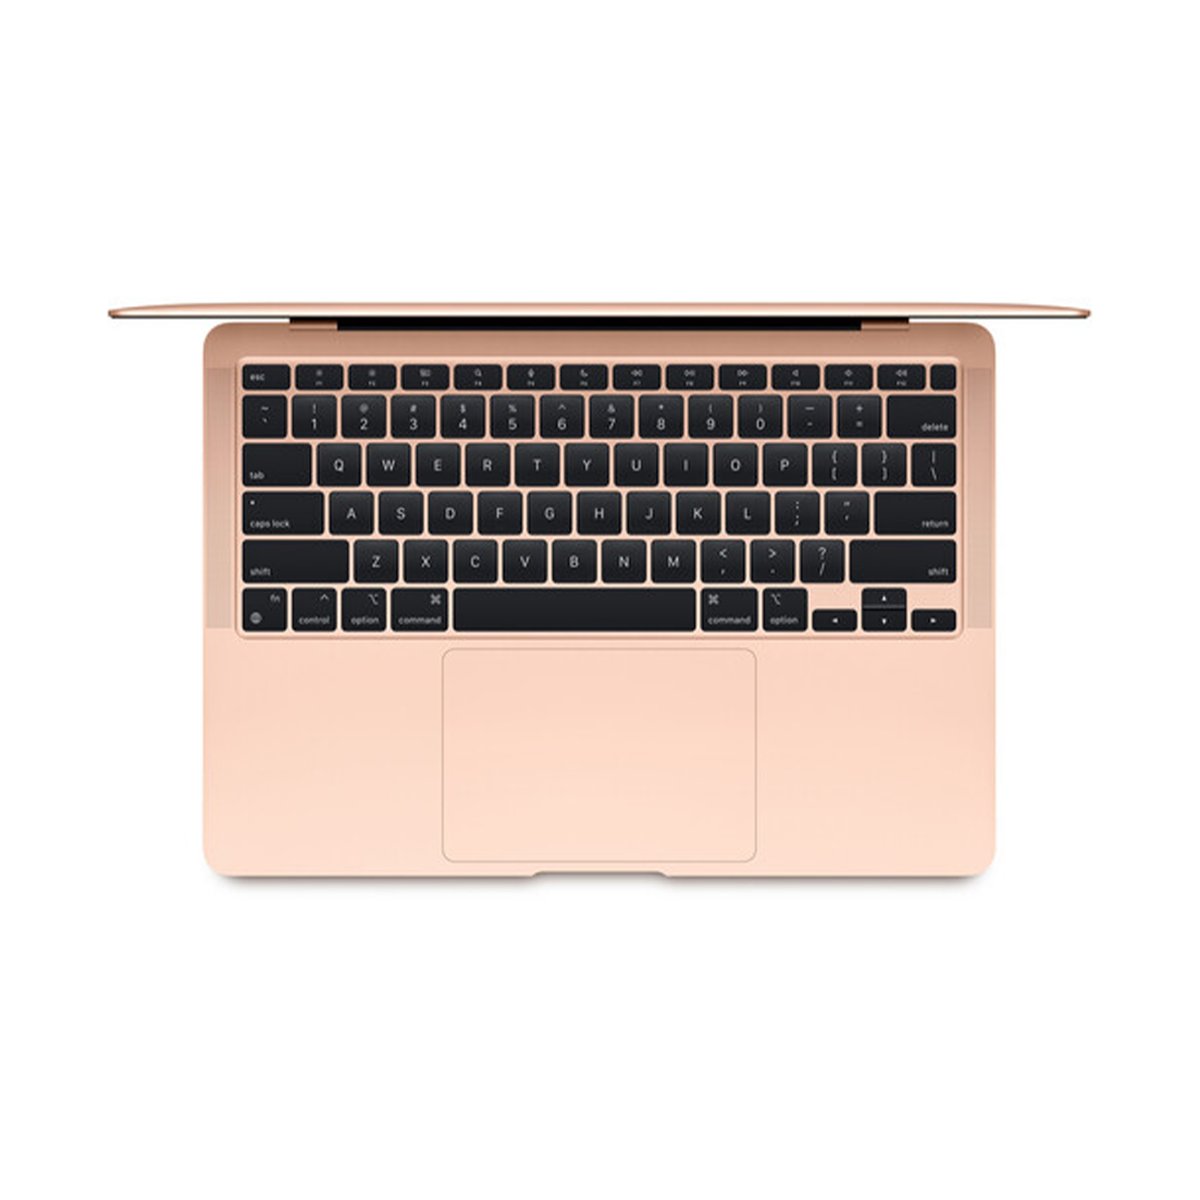 Apple MacBook Air 13" MGND3LL/A, Apple M1 chip with 8-core CPU and 7-core GPU,8GB RAM,256GB SSD,Gold,English Keyboard Only